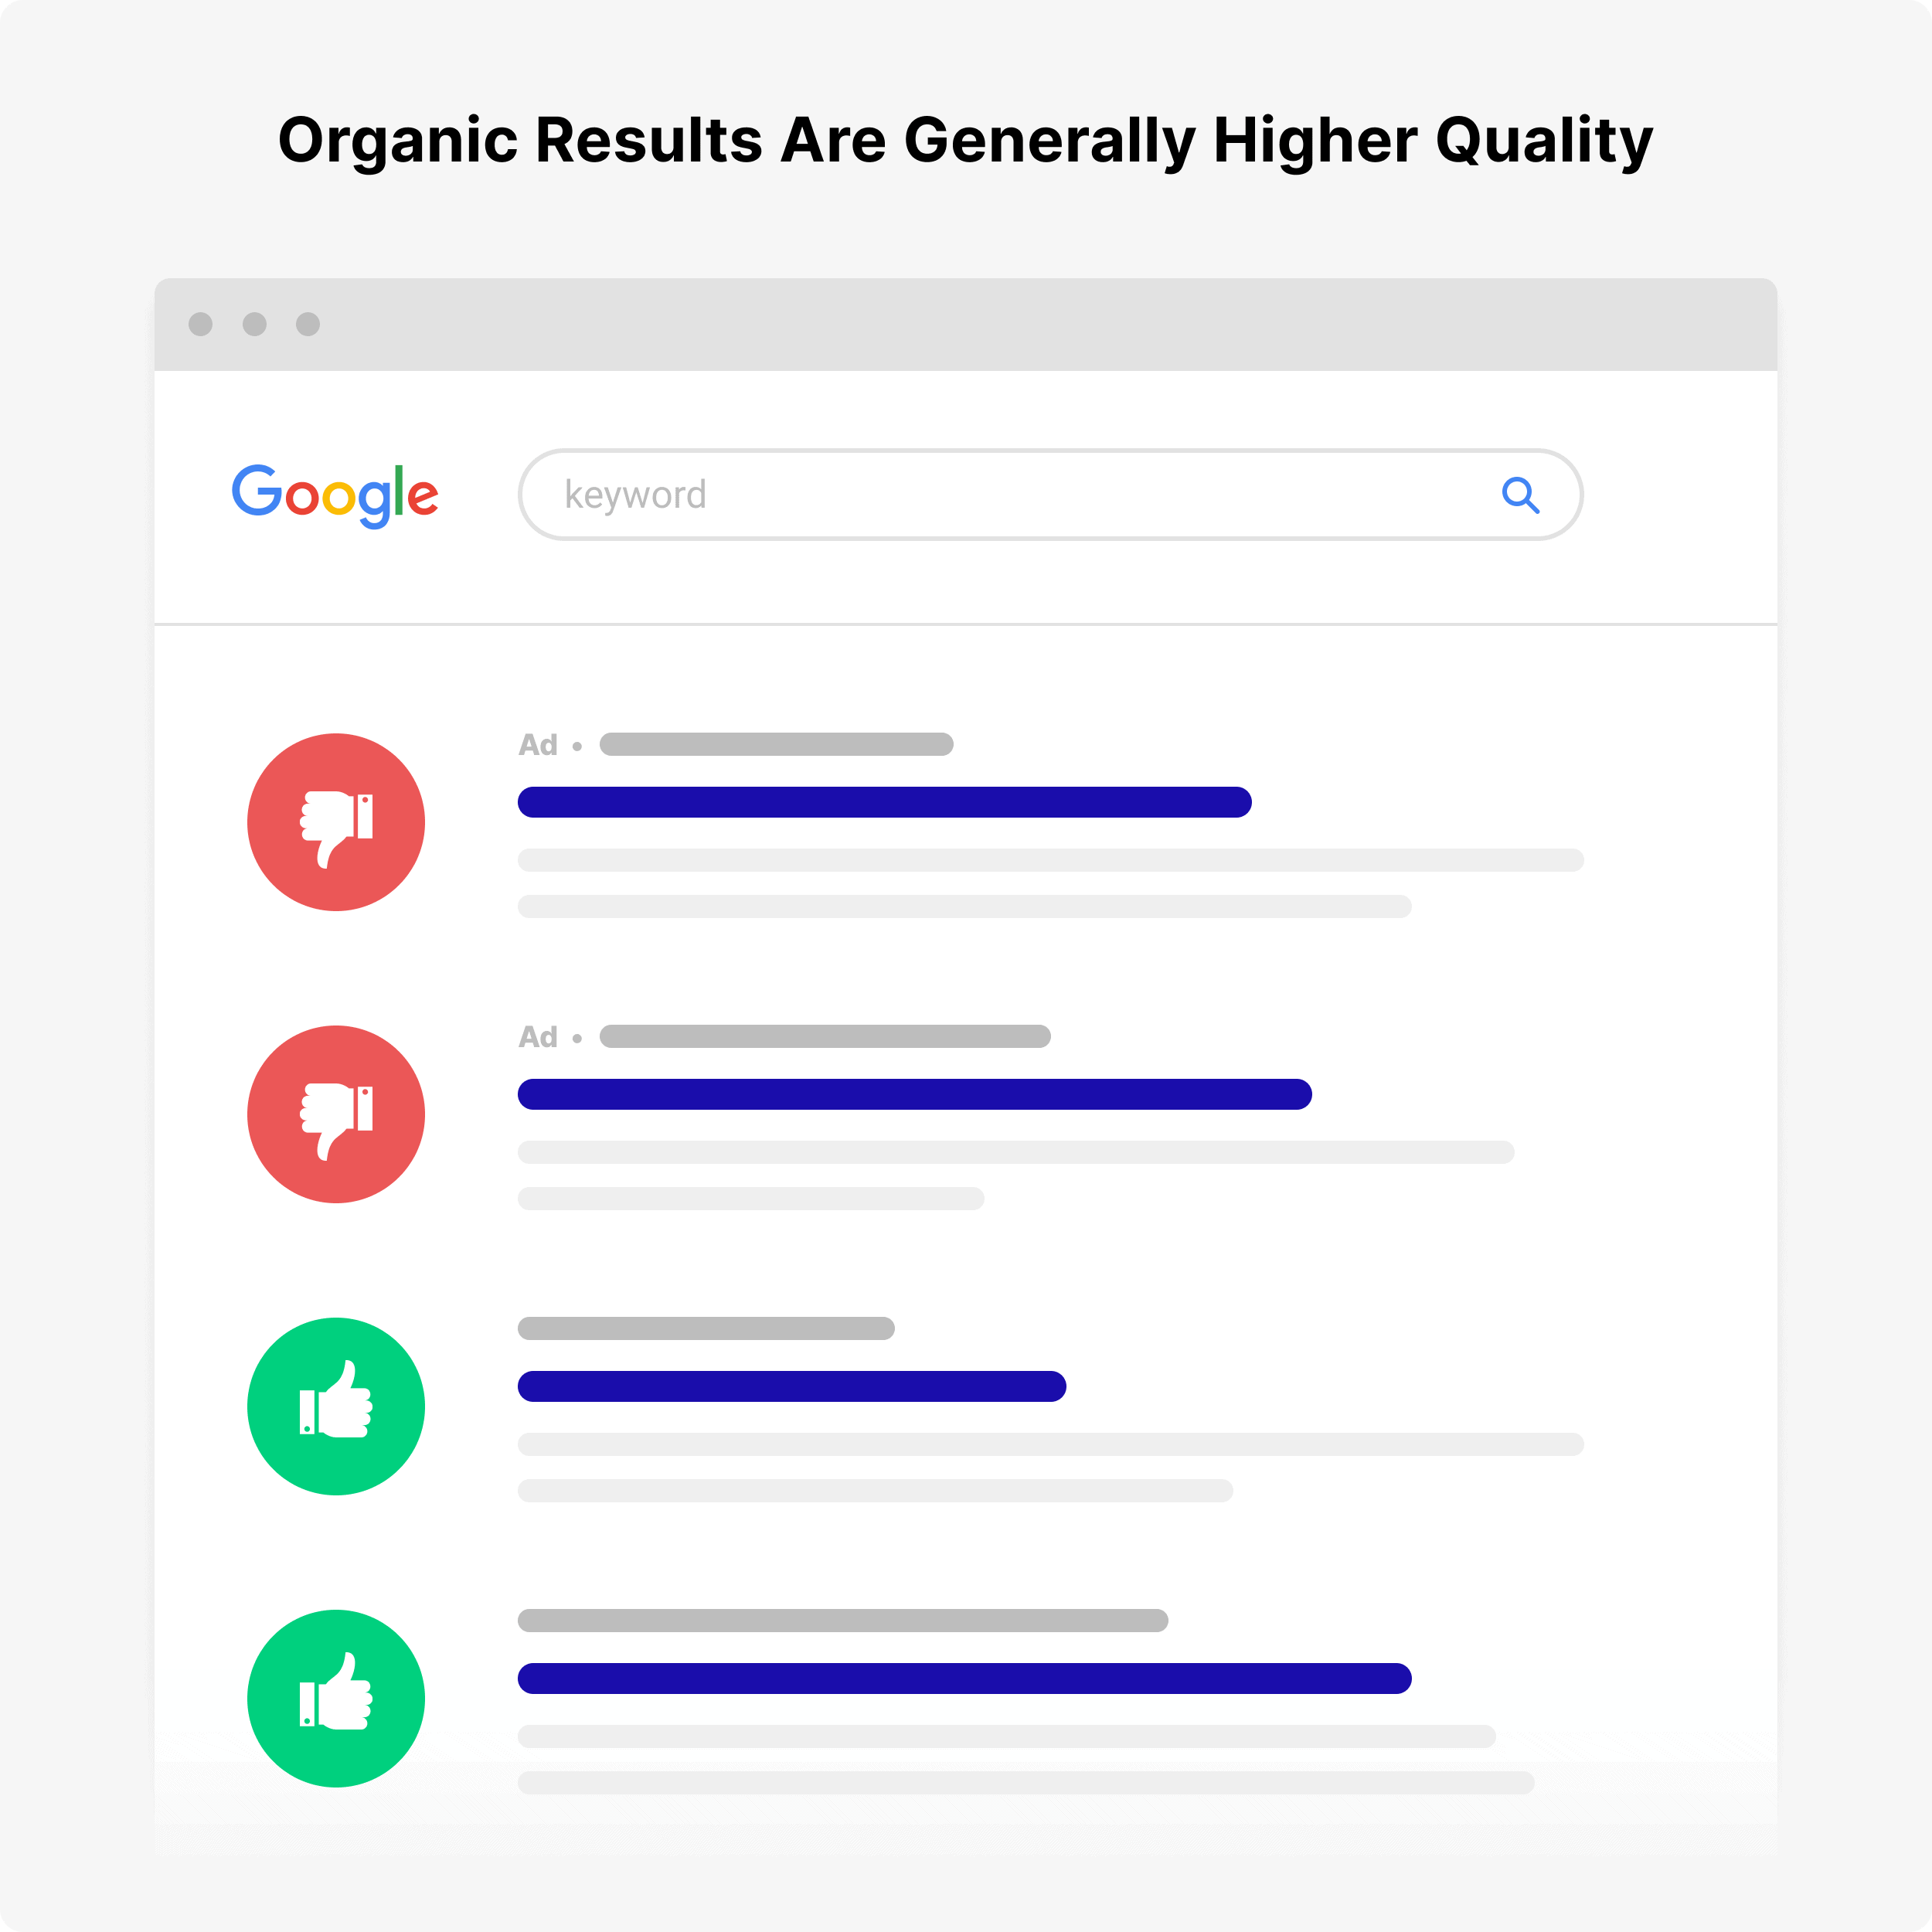 Organic results are higher quality